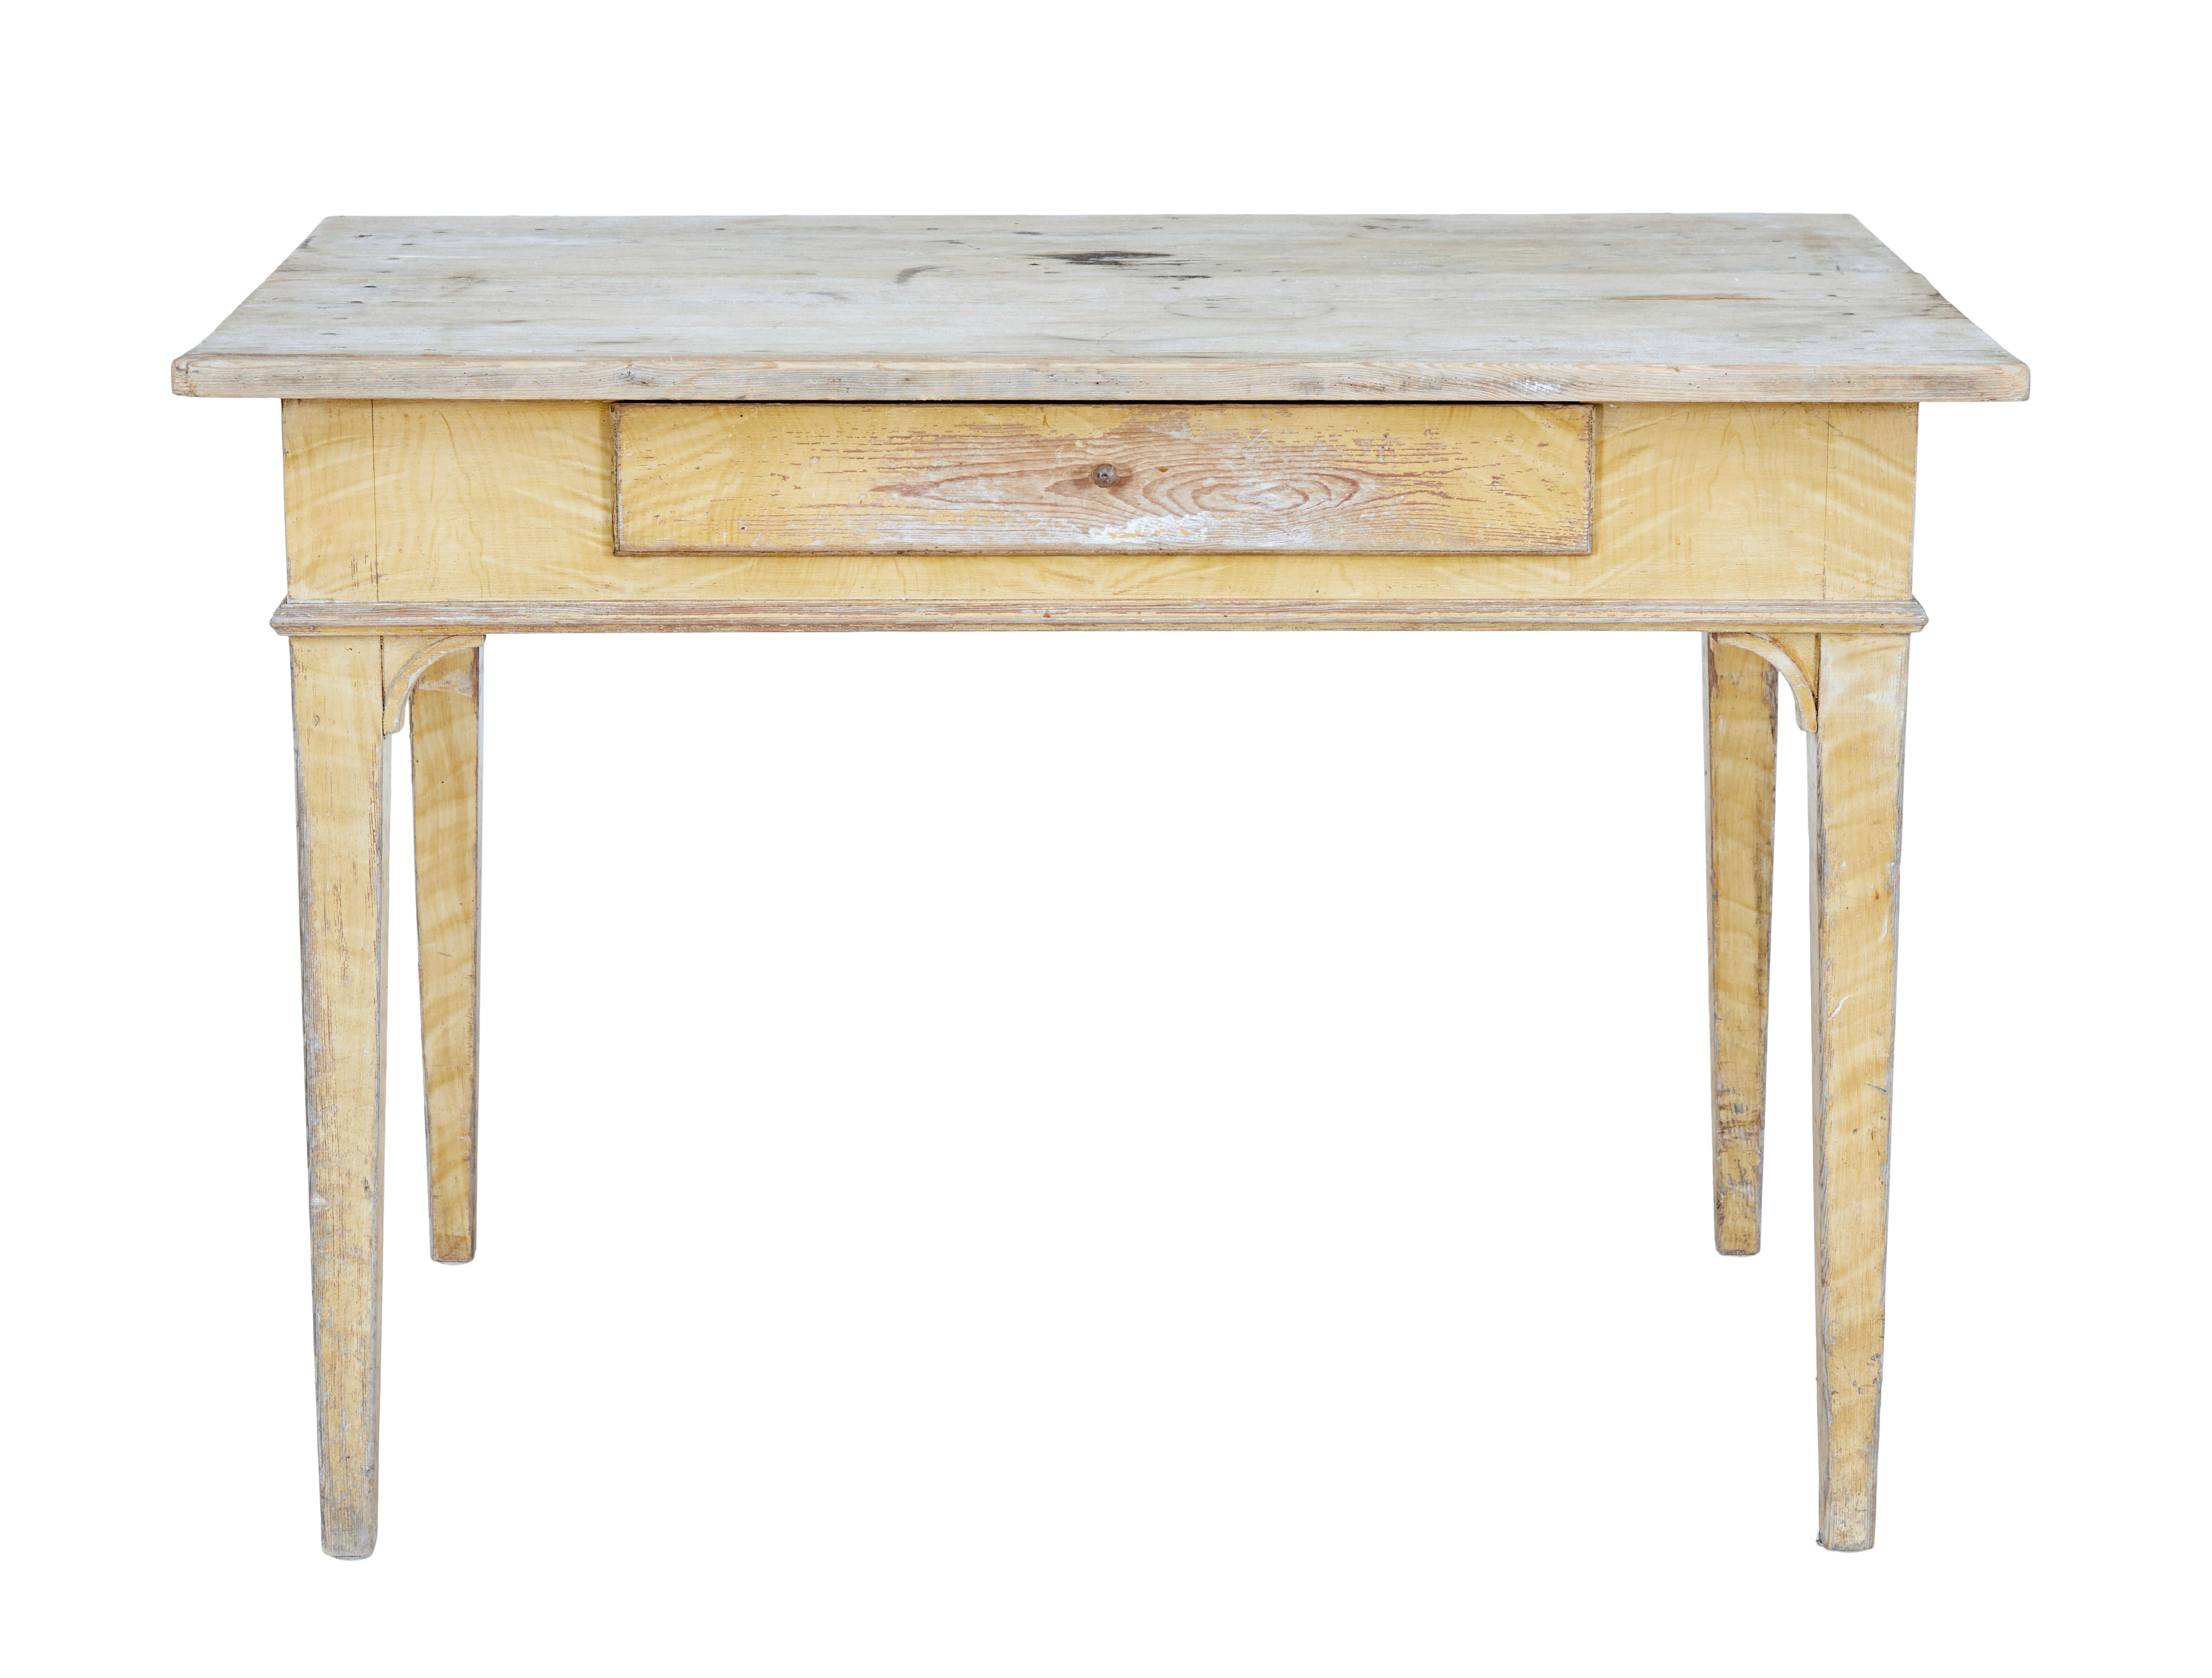 Hand-Crafted Swedish 19th Century Painted Pine Kitchen Table For Sale